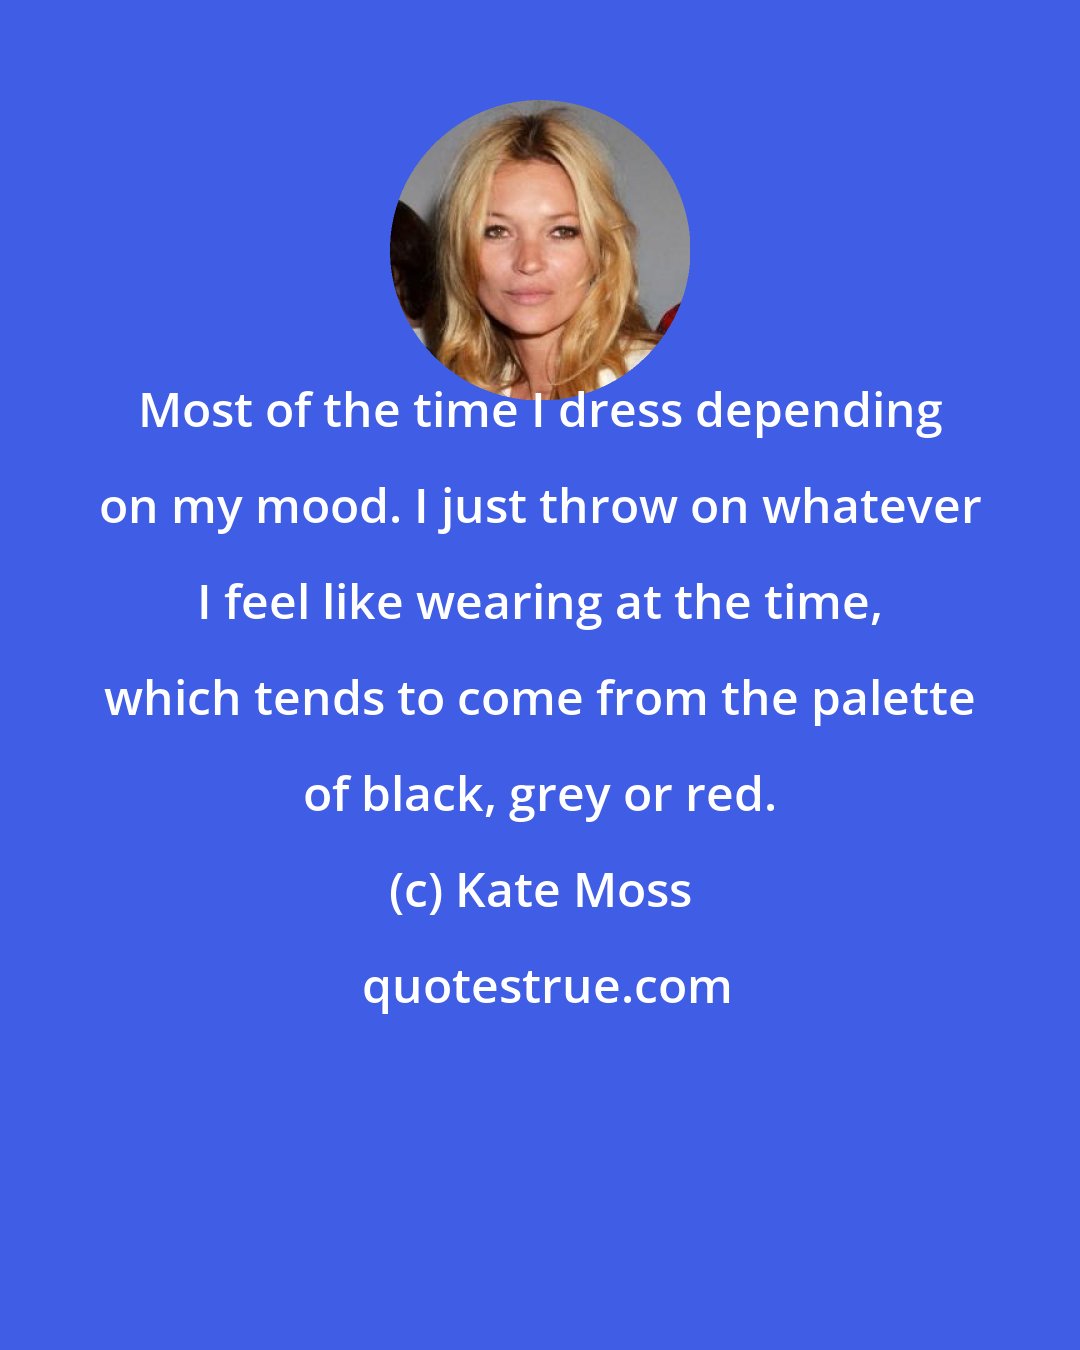 Kate Moss: Most of the time I dress depending on my mood. I just throw on whatever I feel like wearing at the time, which tends to come from the palette of black, grey or red.